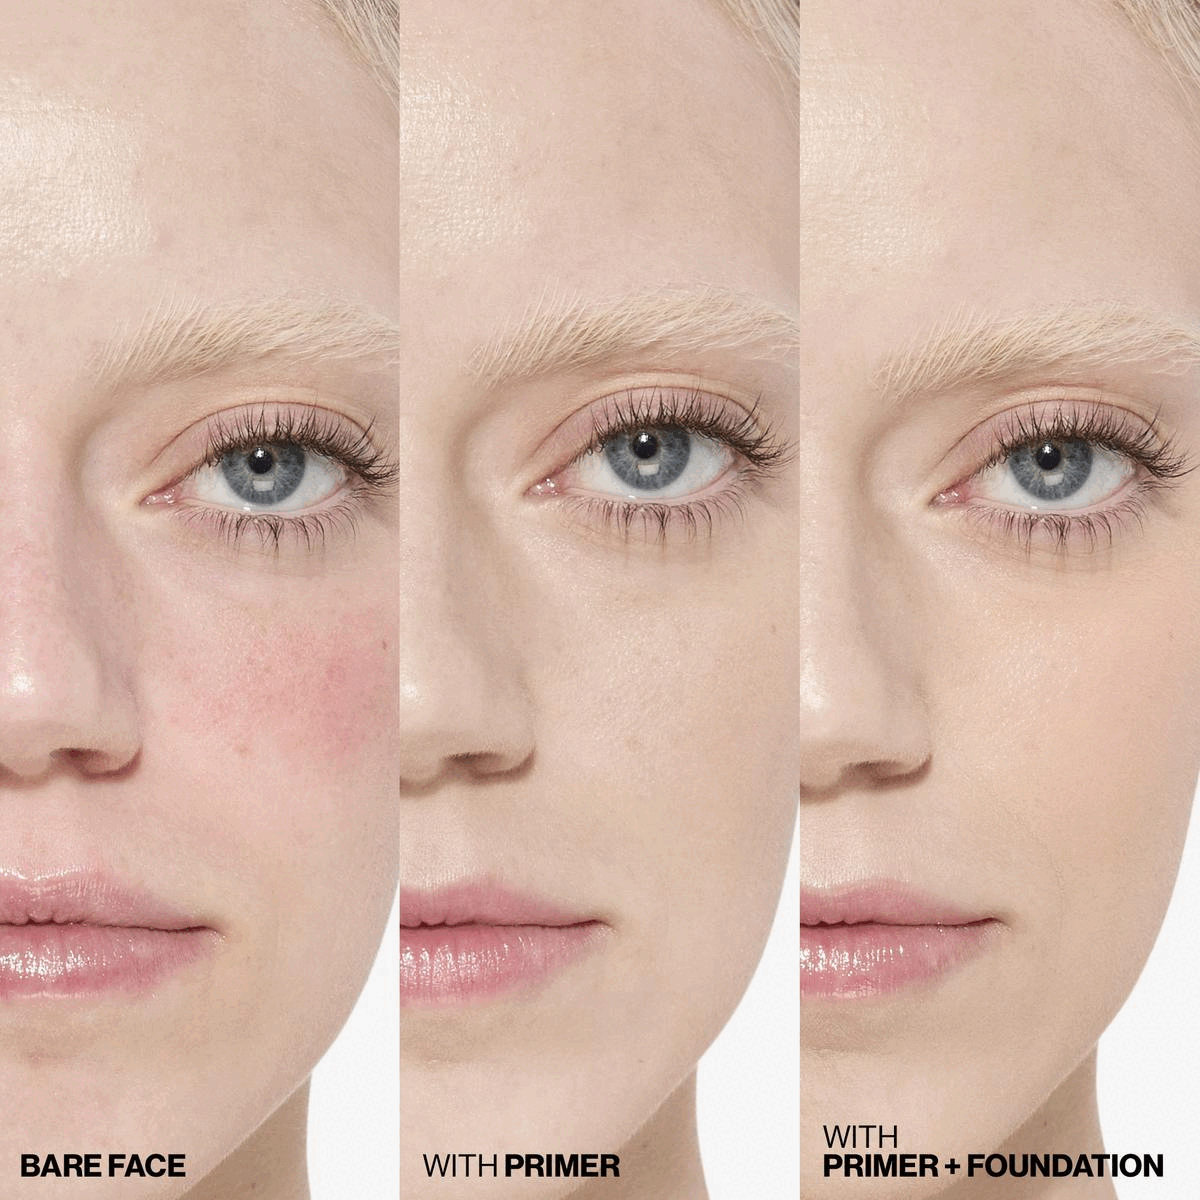 Image 1, Bare Faced, With Primer, with Primer and Foundation. Image 2, Red Algae, Rose and Chaga Mushroom sooth stressed skin to help reduce the look of irritation